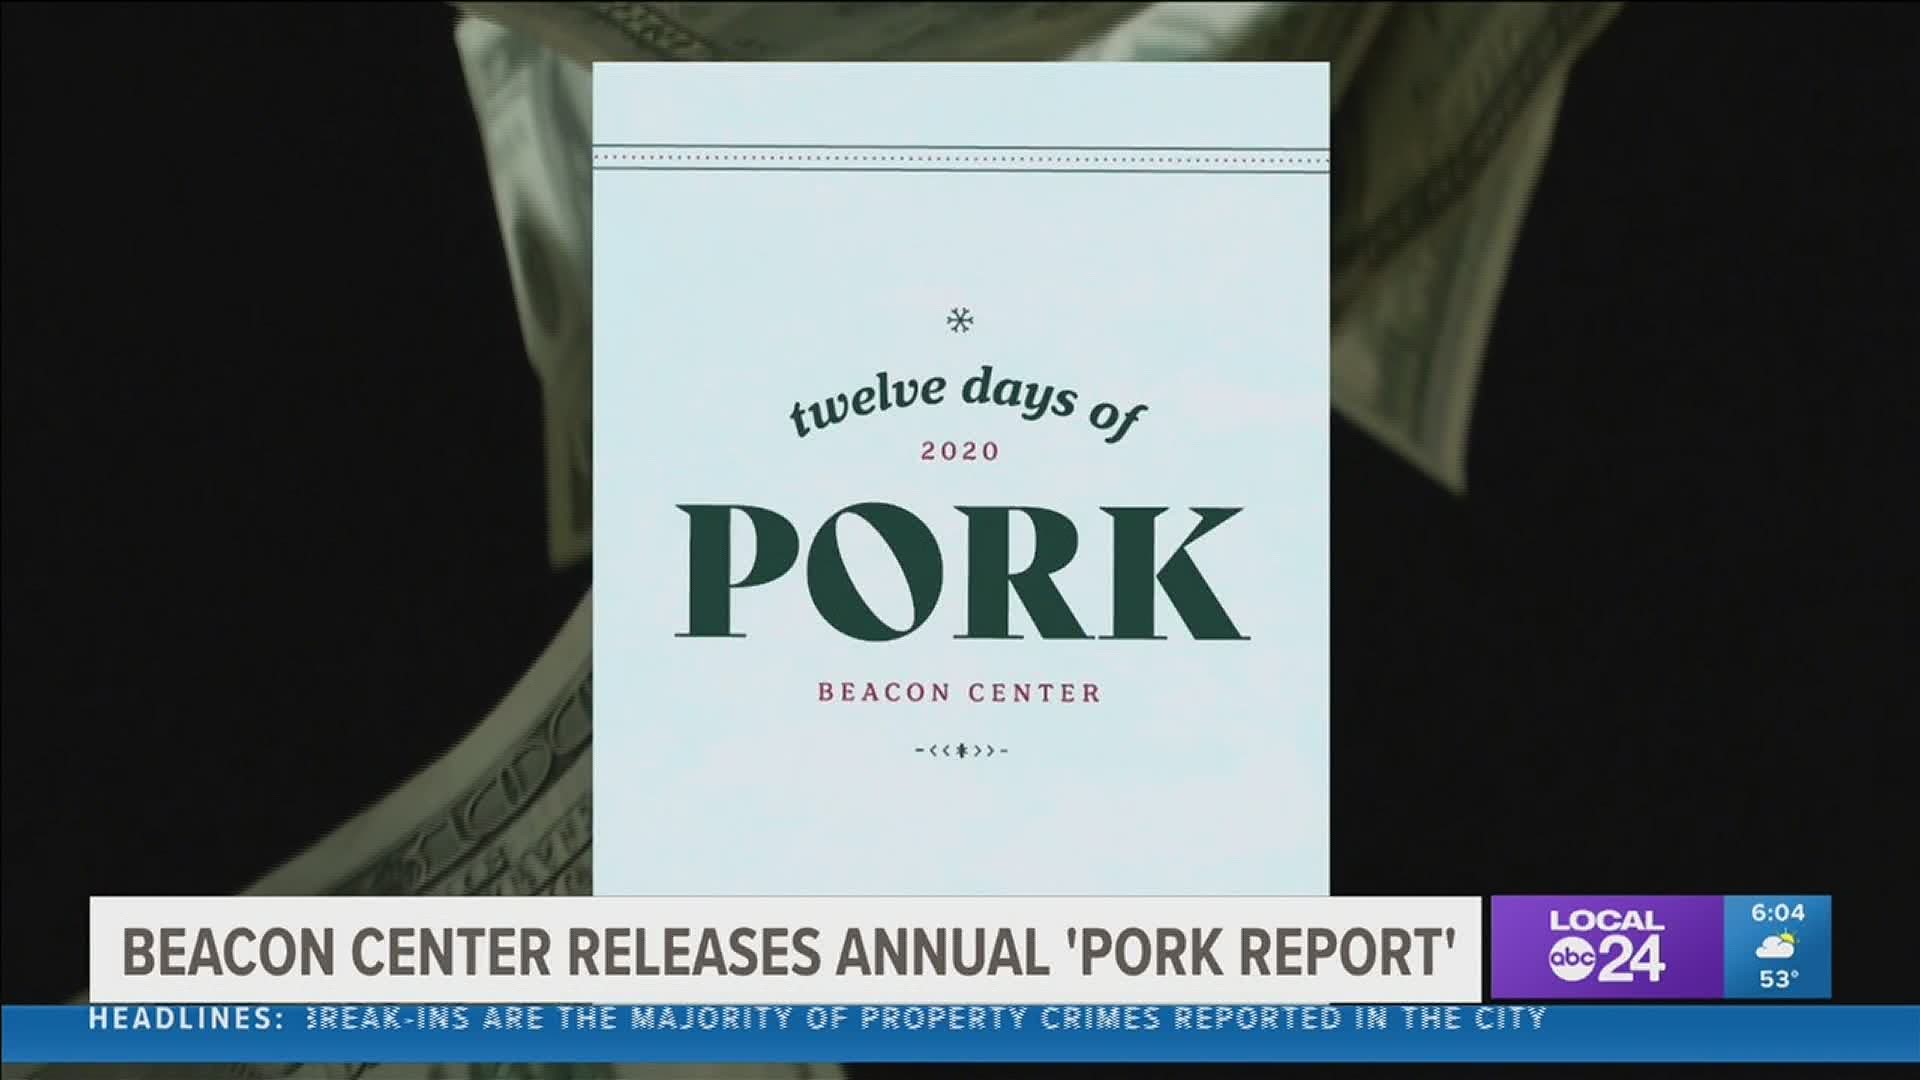 Nashville's 34% property tax hike received the "Pork of the Year" award.